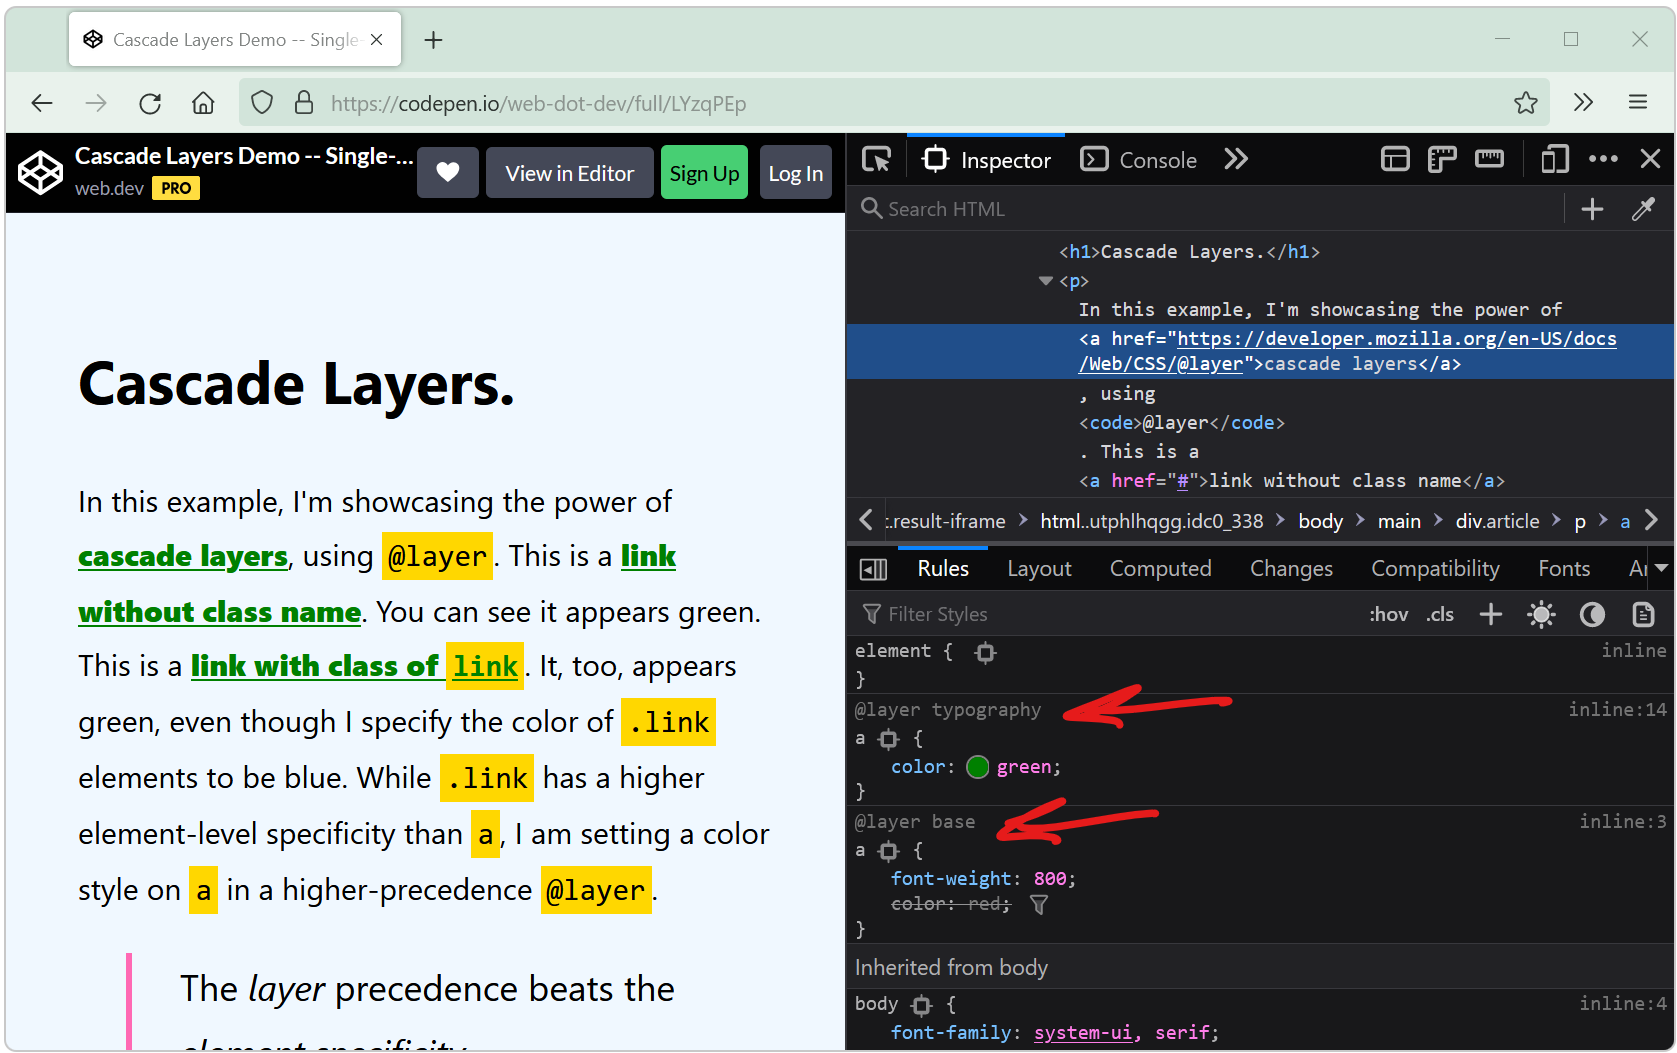 Screenshot of Firefox, with a demo page that uses layers and devtools opened, showing the Rules panel with 2 @layer rules